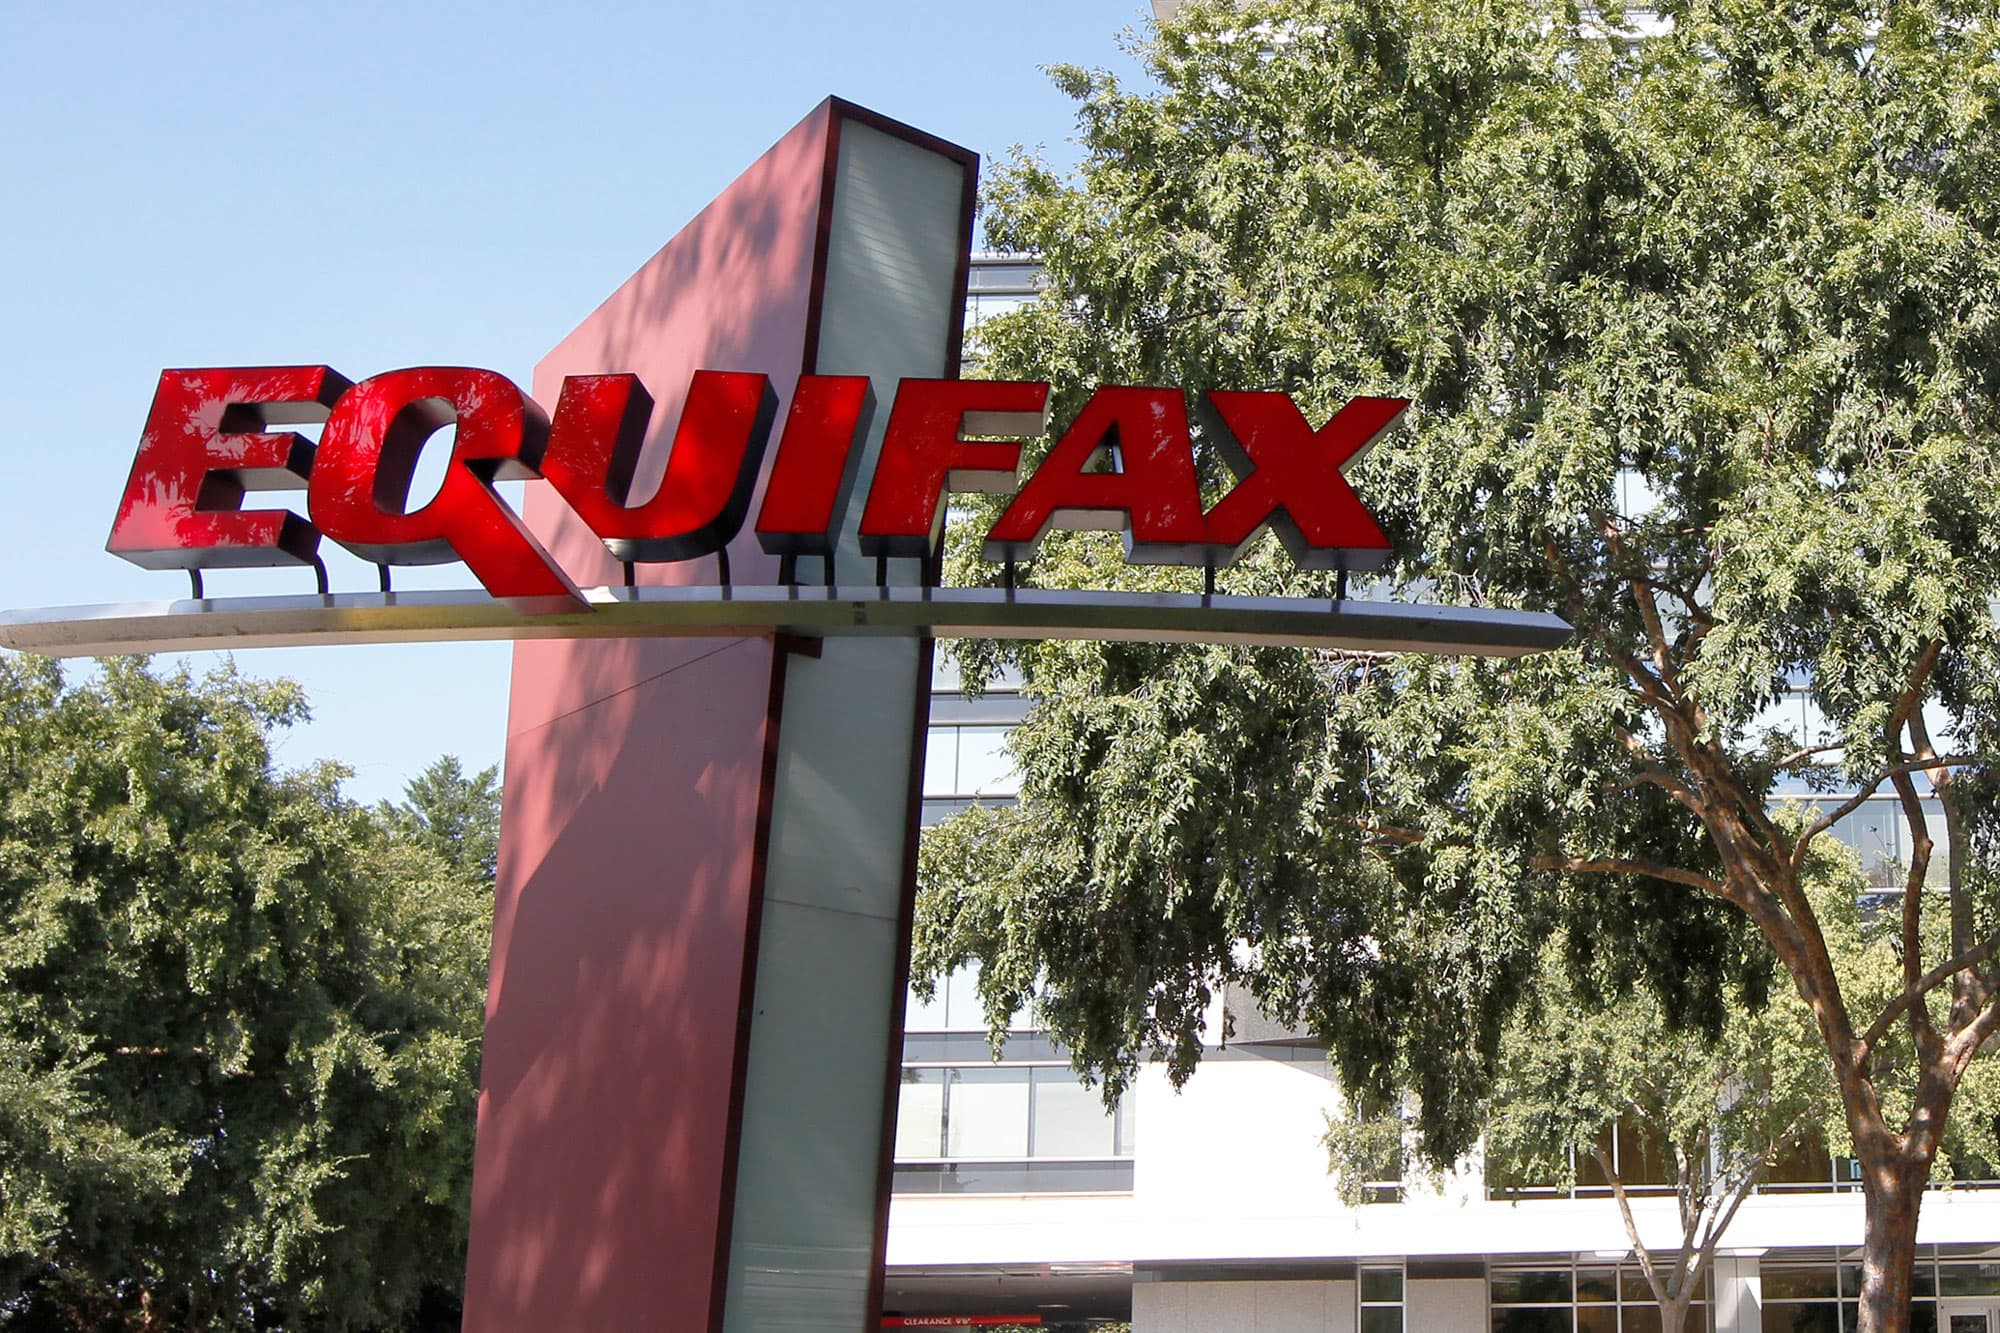 How To Claim Your Compensation From The Equifax Data Breach Settlement